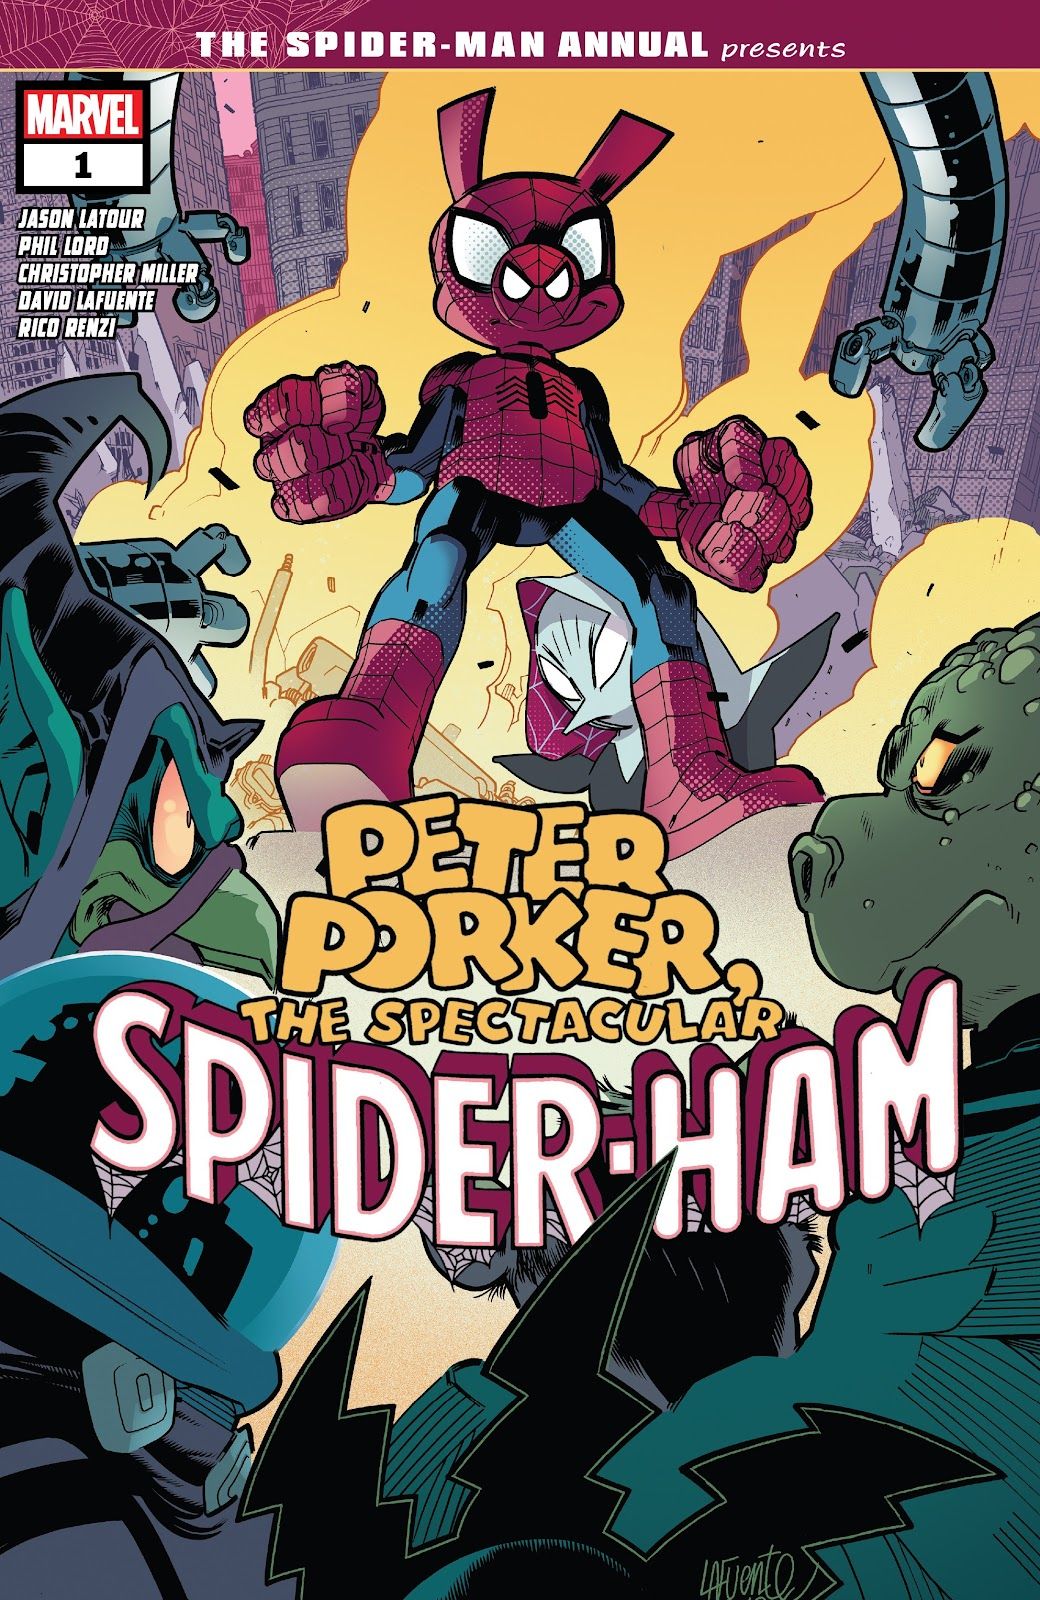 The cover of Spider-Ham Annual #1